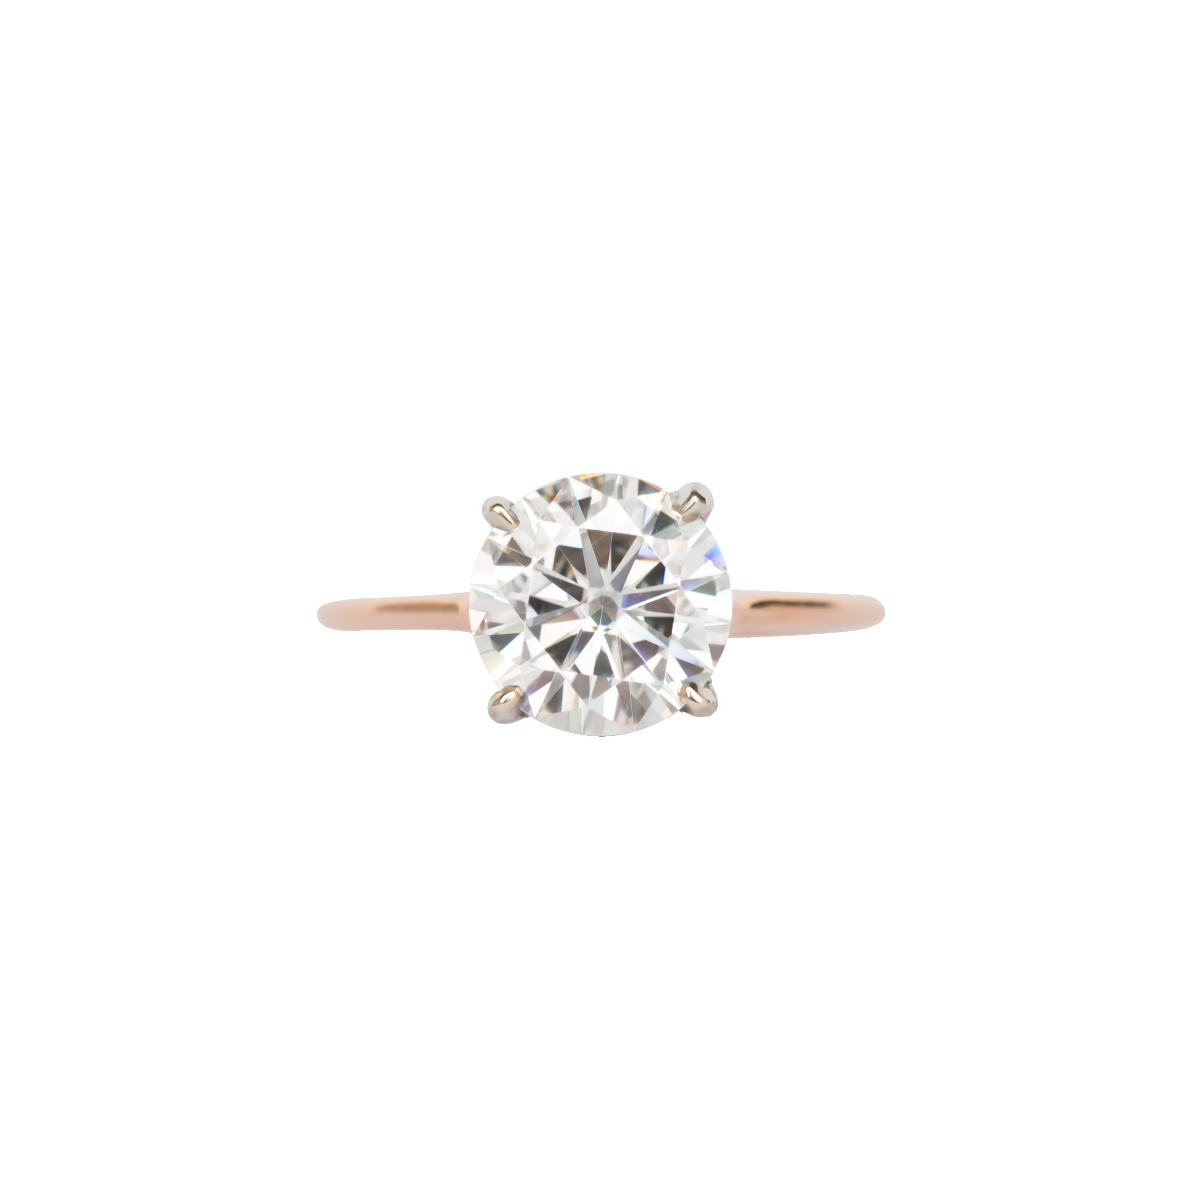 DBK Classic Solitaire Setting With Diamond Basket & Bridge In Two Tone